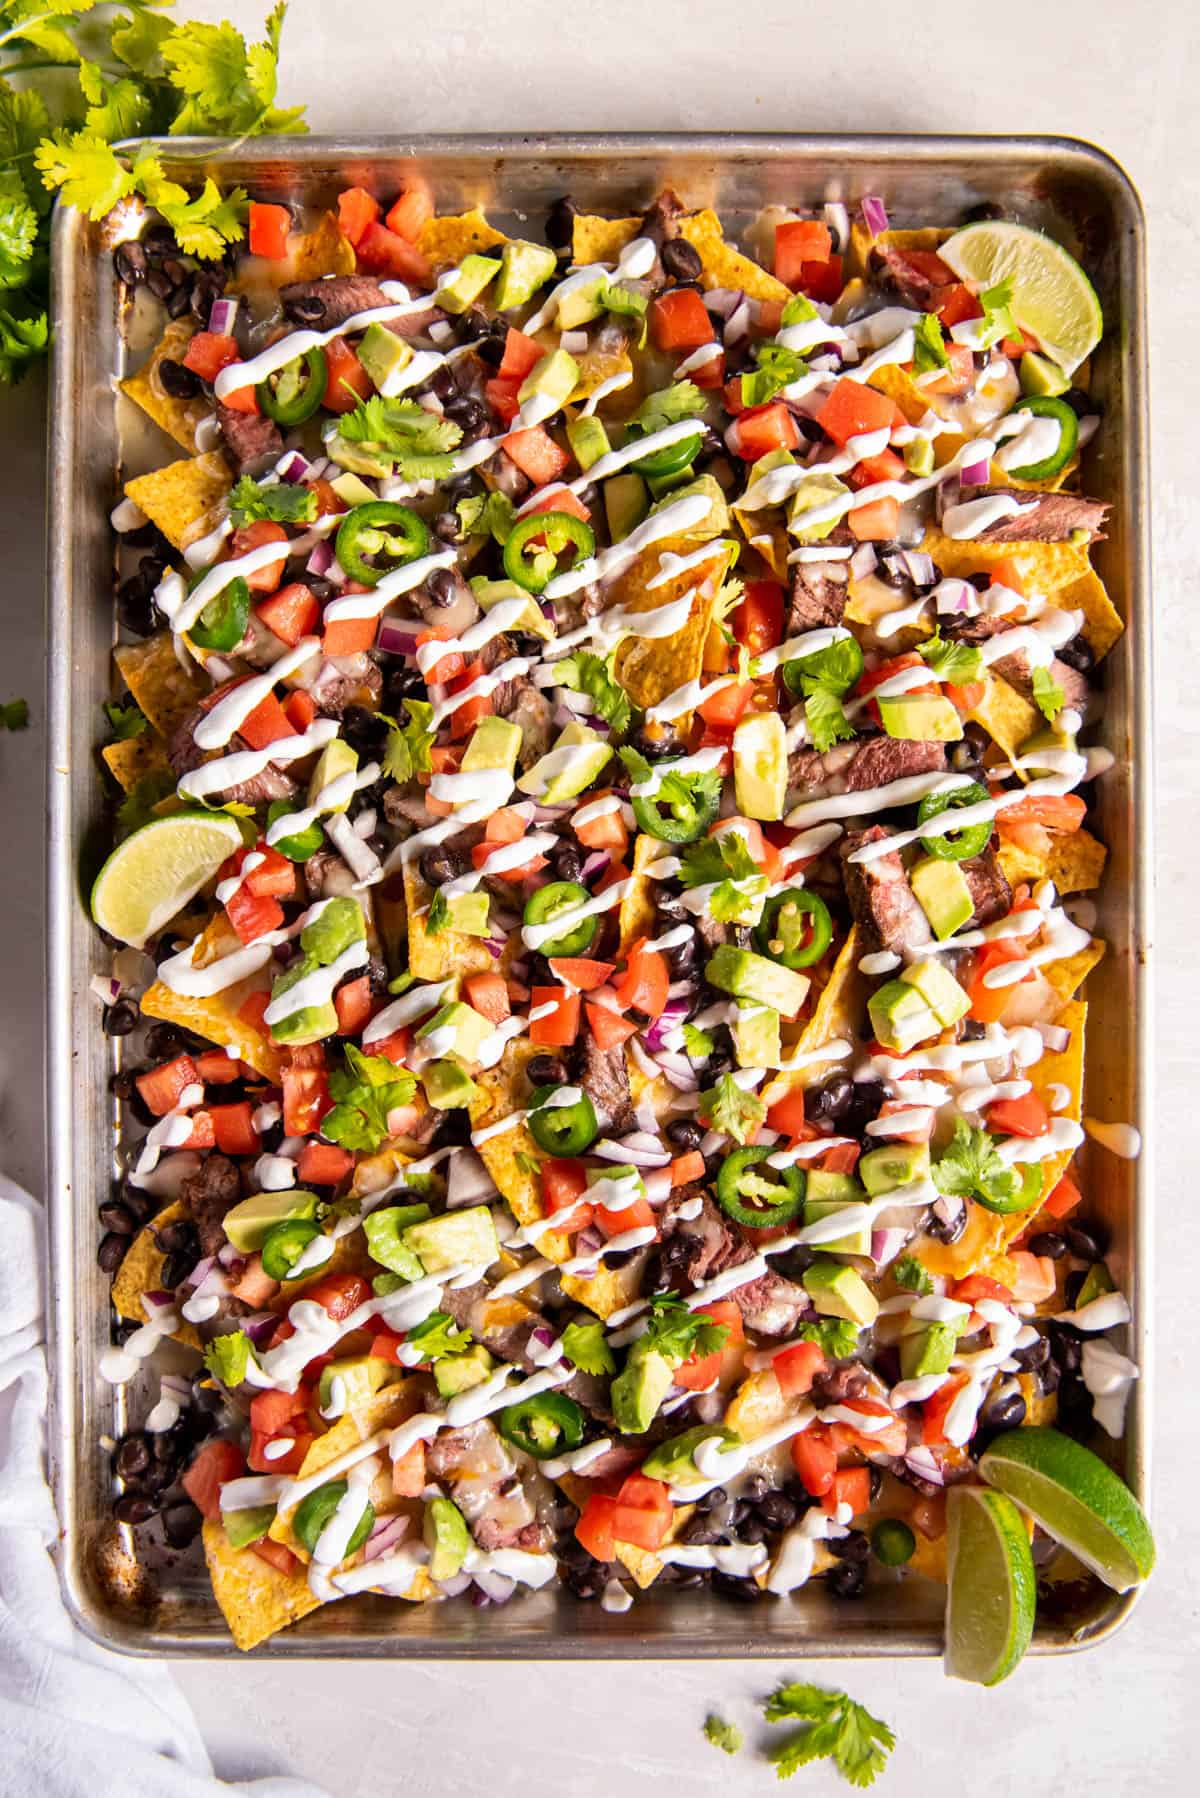 Cooked nachos being served on a sheet pan with nachos toppings like cilantro and sour cream.